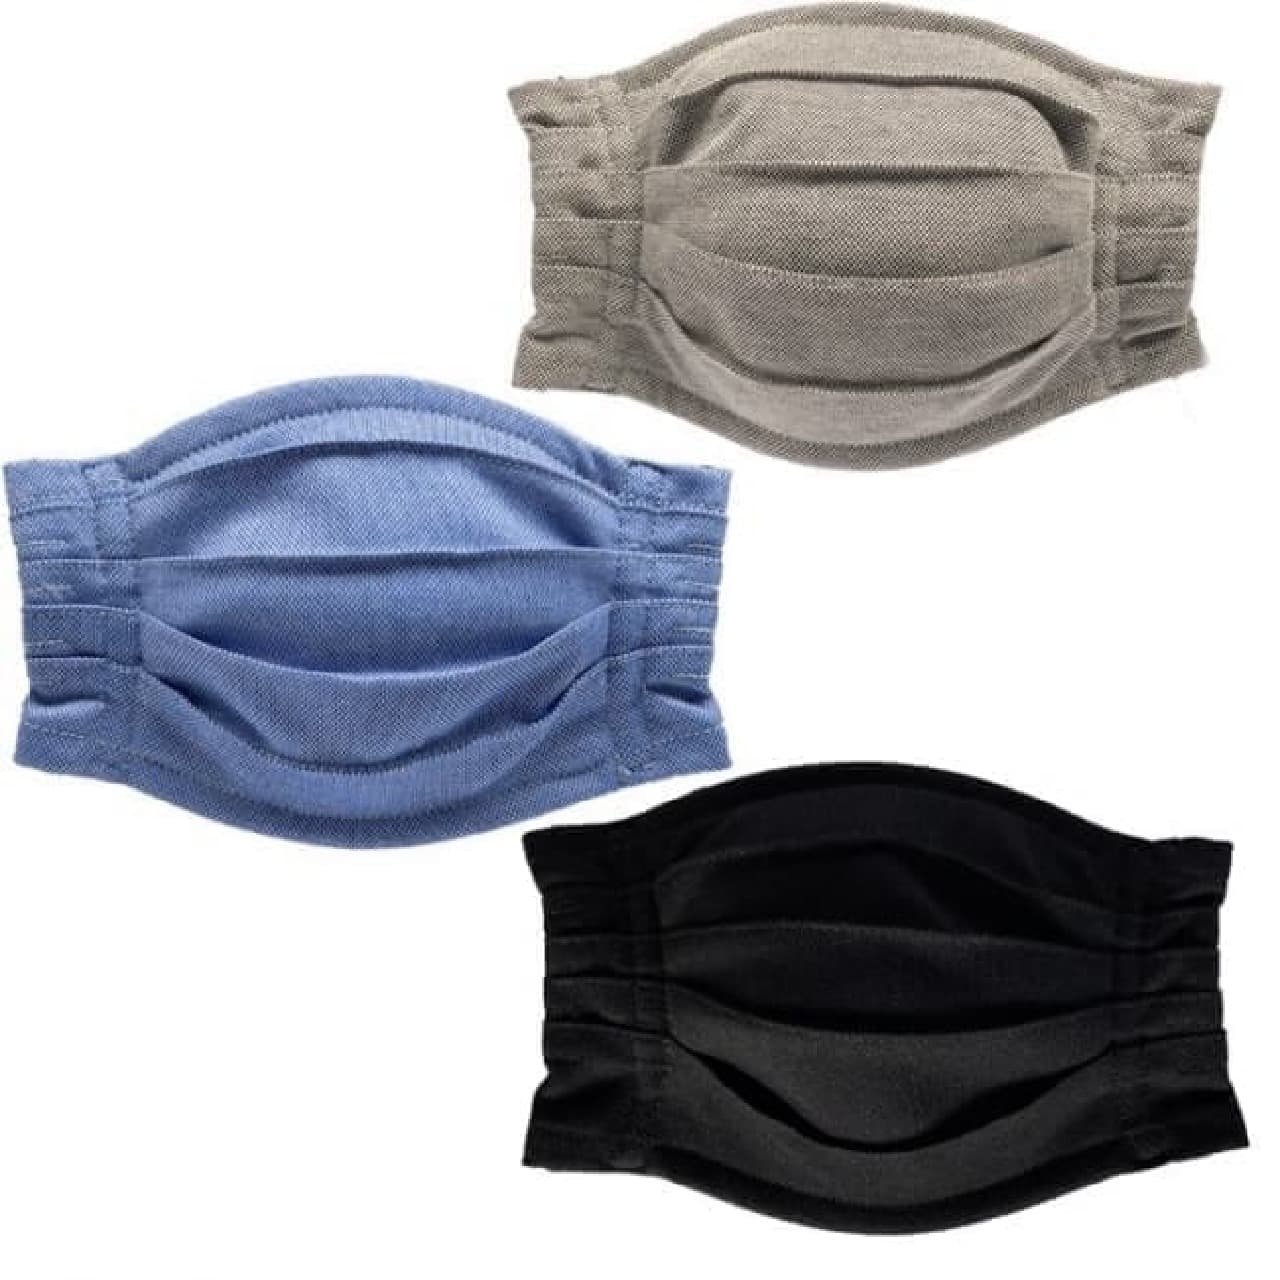 Cooling mask "MISAKO MASK Breath" that makes it easy to breathe